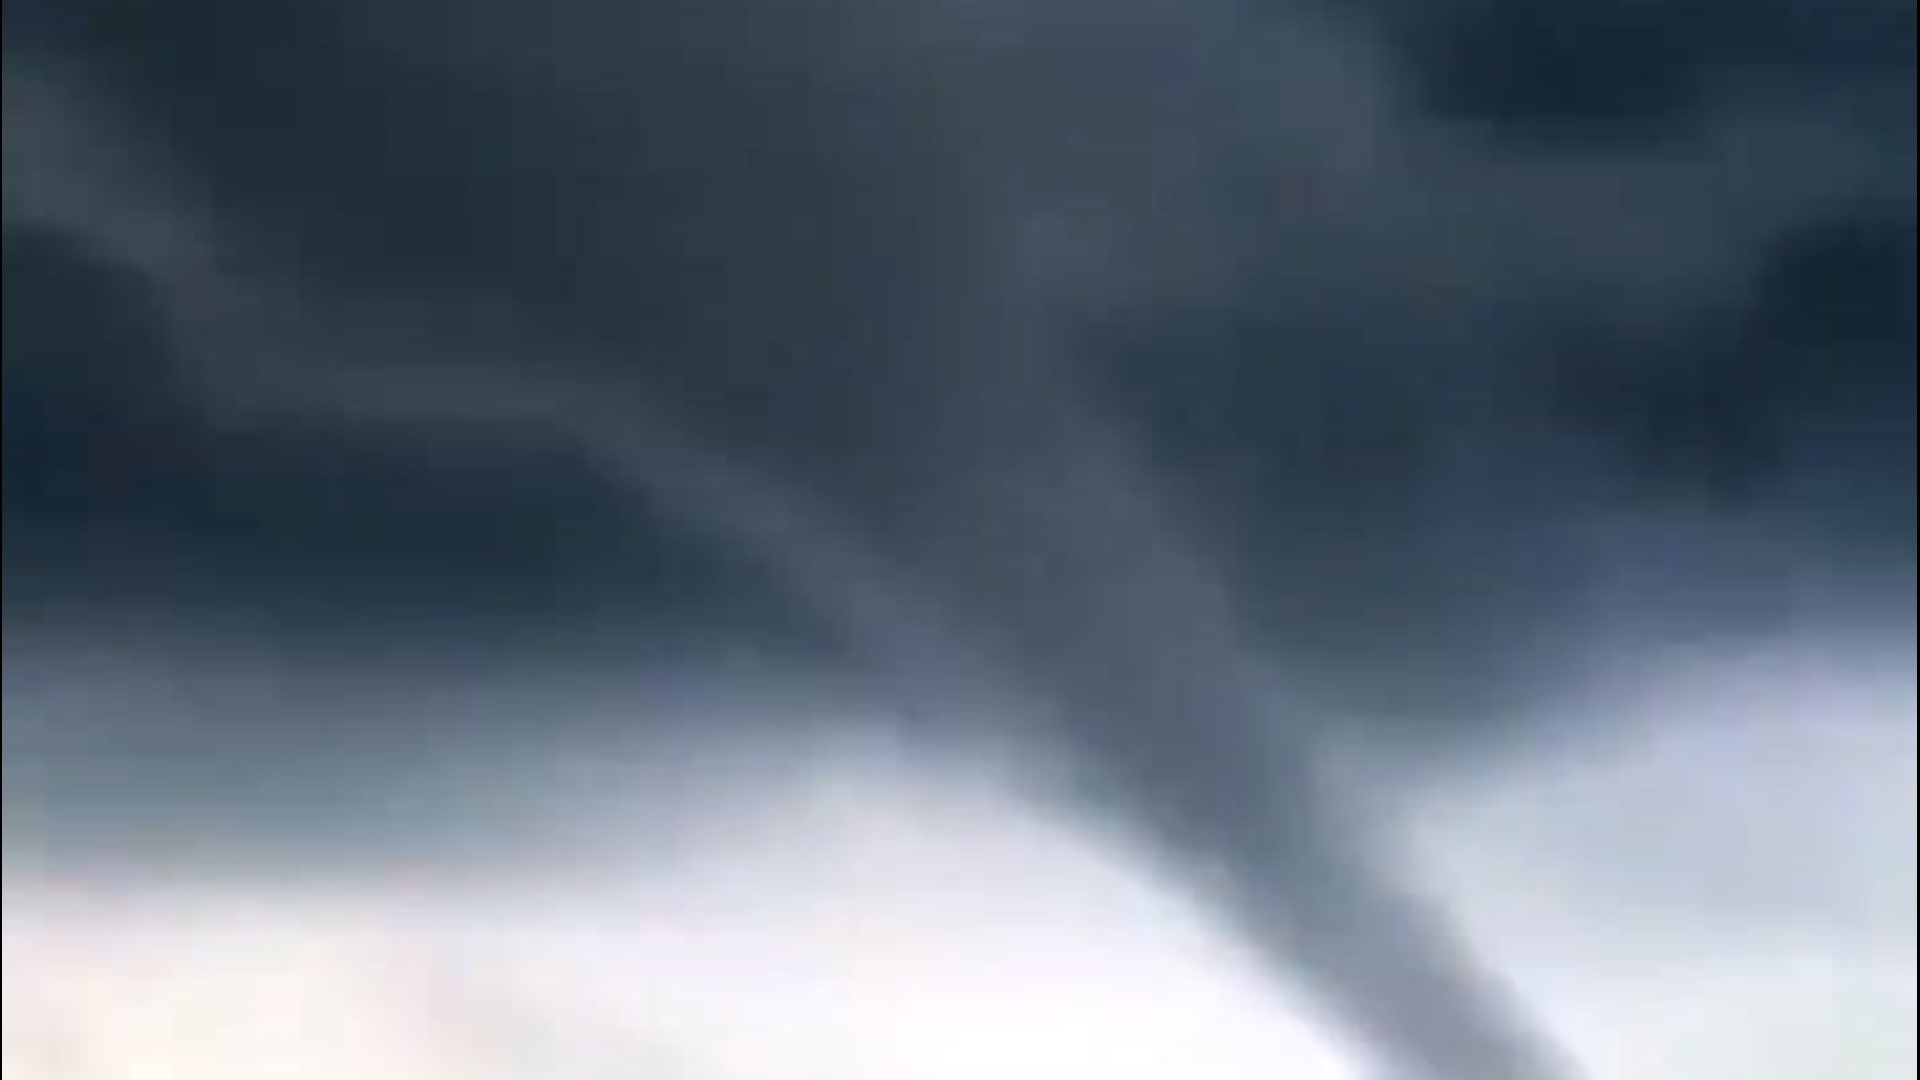 This waterspout was spotted above Choctawhatchee Bay off the coast of Lake Lorraine, Florida, on March 31, during severe weather.